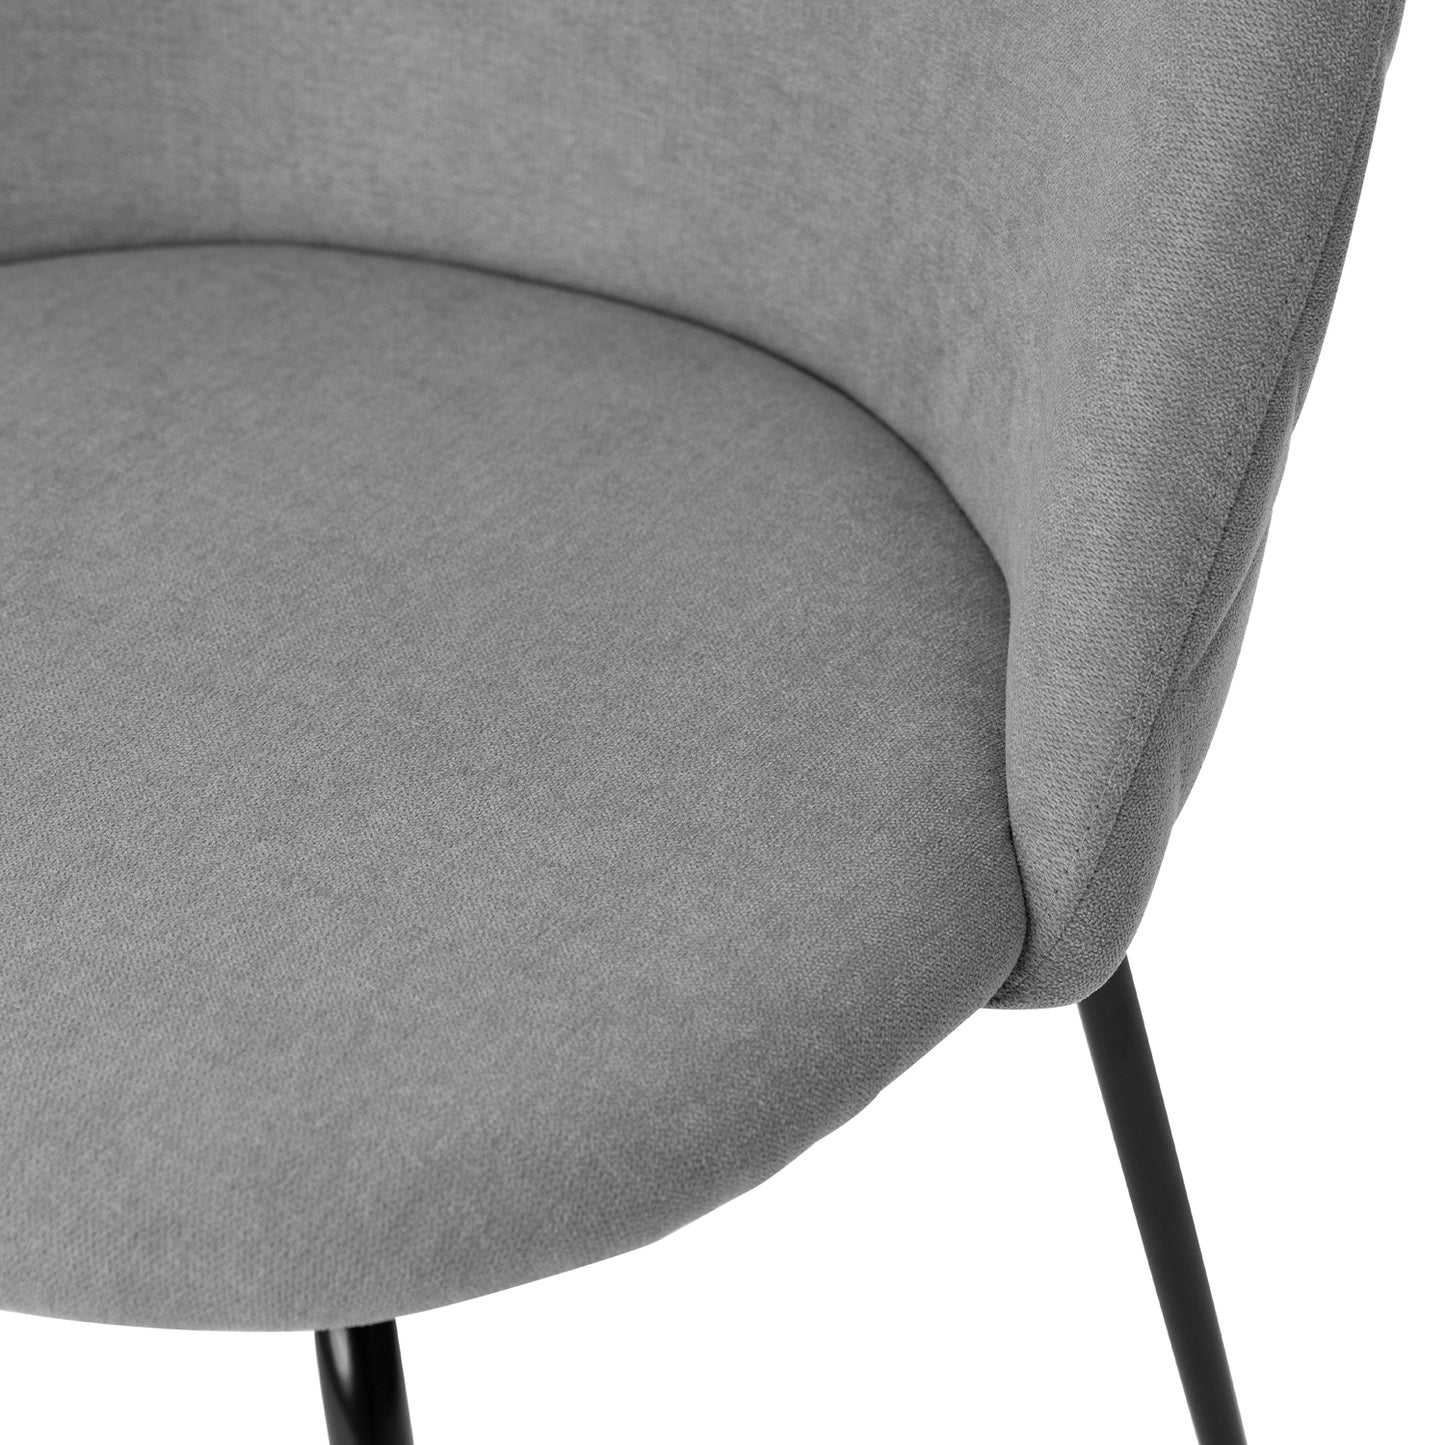 Laila dining chair